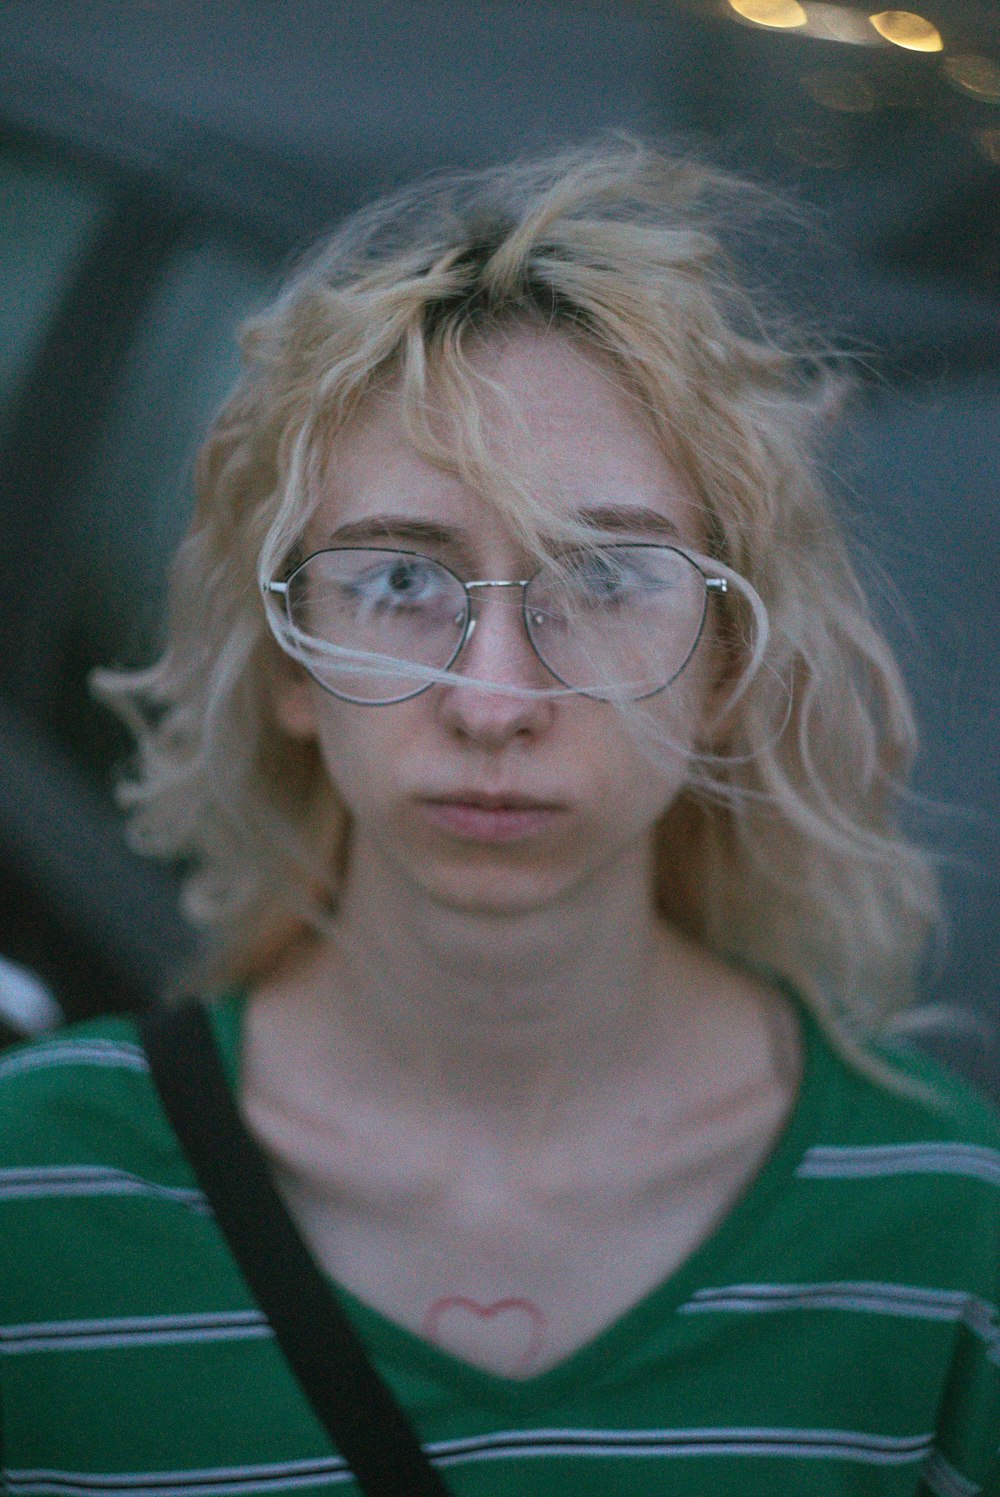 a woman wearing glasses and a green shirt